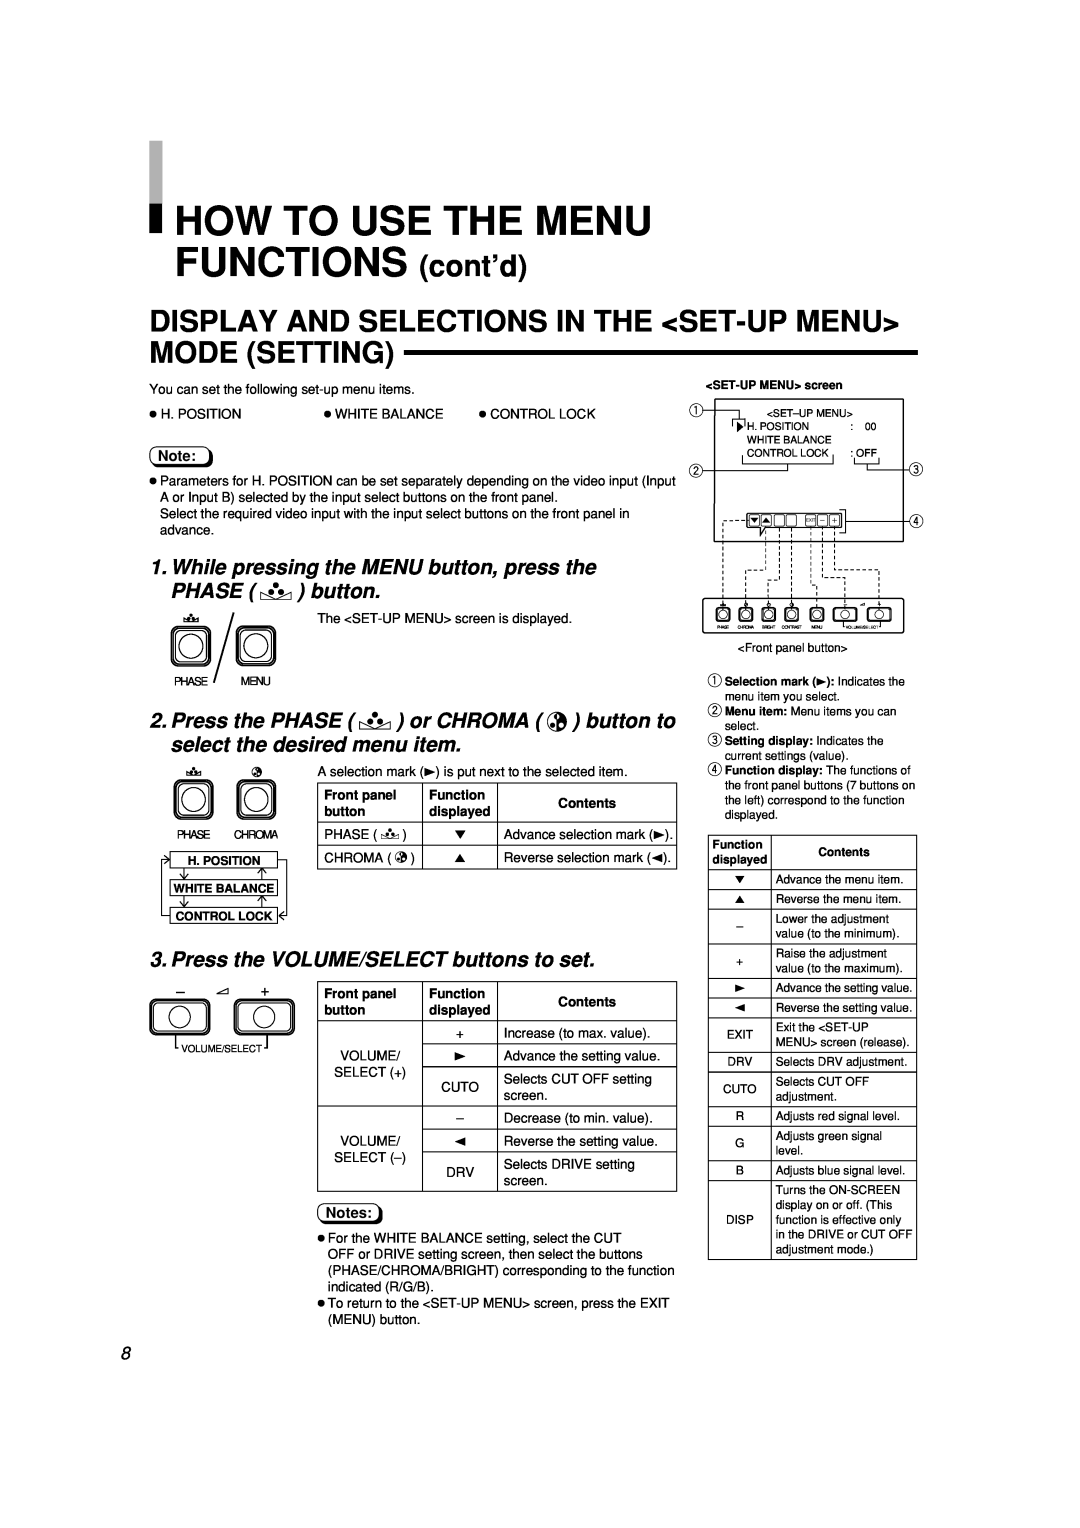 JVC LCT2142-001A-H manual HOW TO USE THE MENU FUNCTIONS cont’d, Display And Selections In The Set-Up Menu Mode Setting 